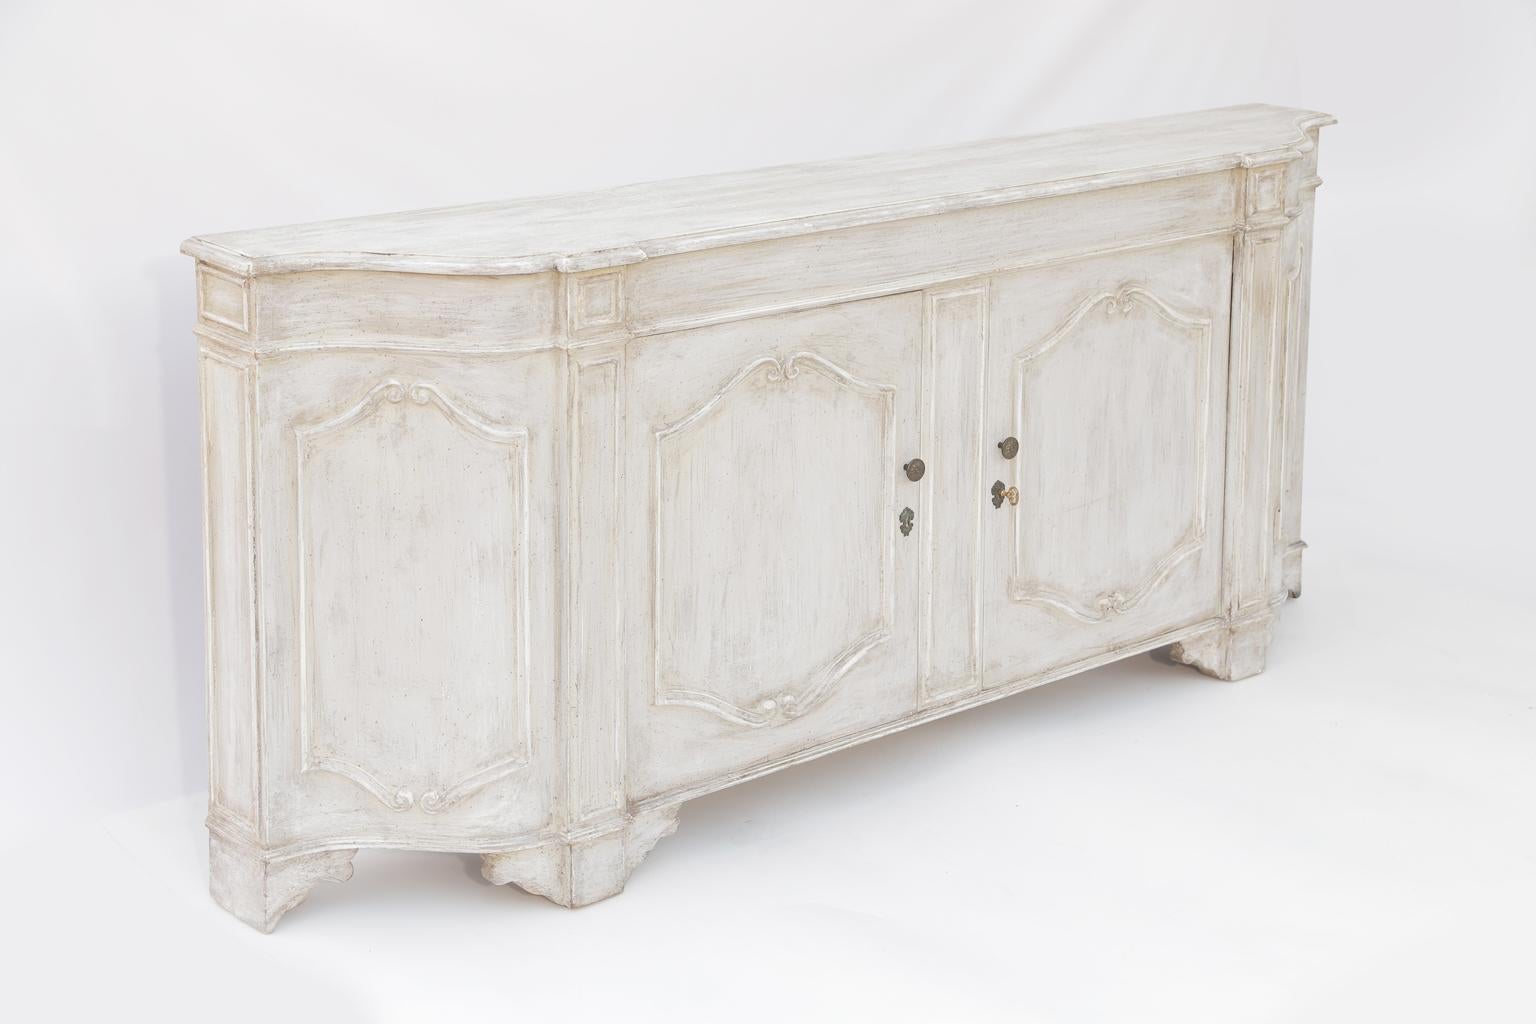 Cabinet, having a very narrow profile of only 12 1/4 inches deep, its molded and shaped top on a conforming breakfront case, with double cupboard doors, all trimmed with scrolling moldings, raised on bracket feet. 

Stock ID: D2964.